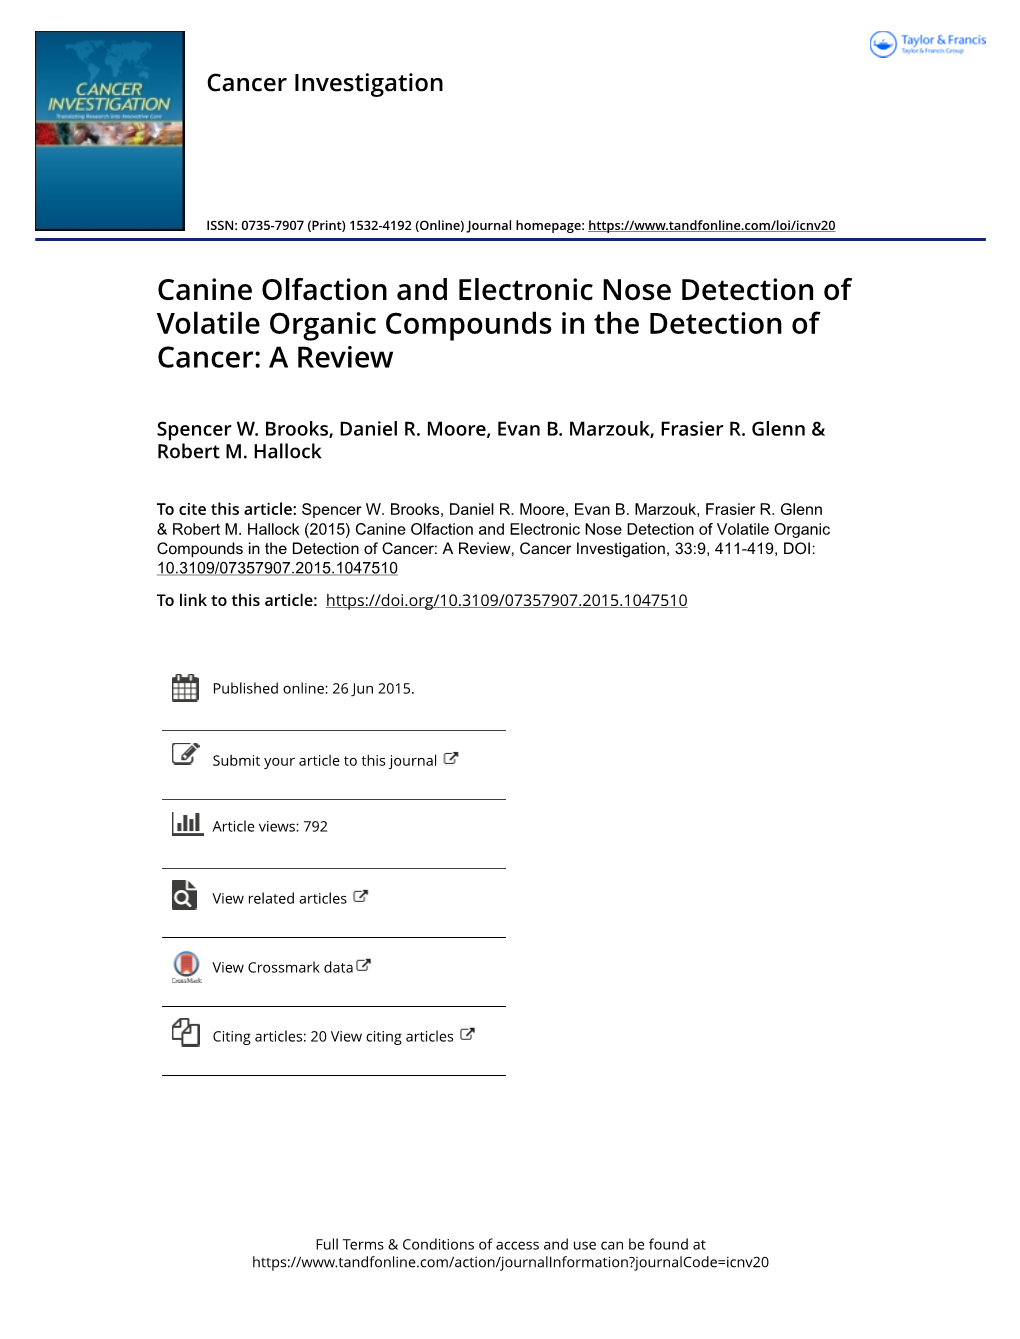 Canine Olfaction and Electronic Nose Detection of Volatile Organic Compounds in the Detection of Cancer: a Review